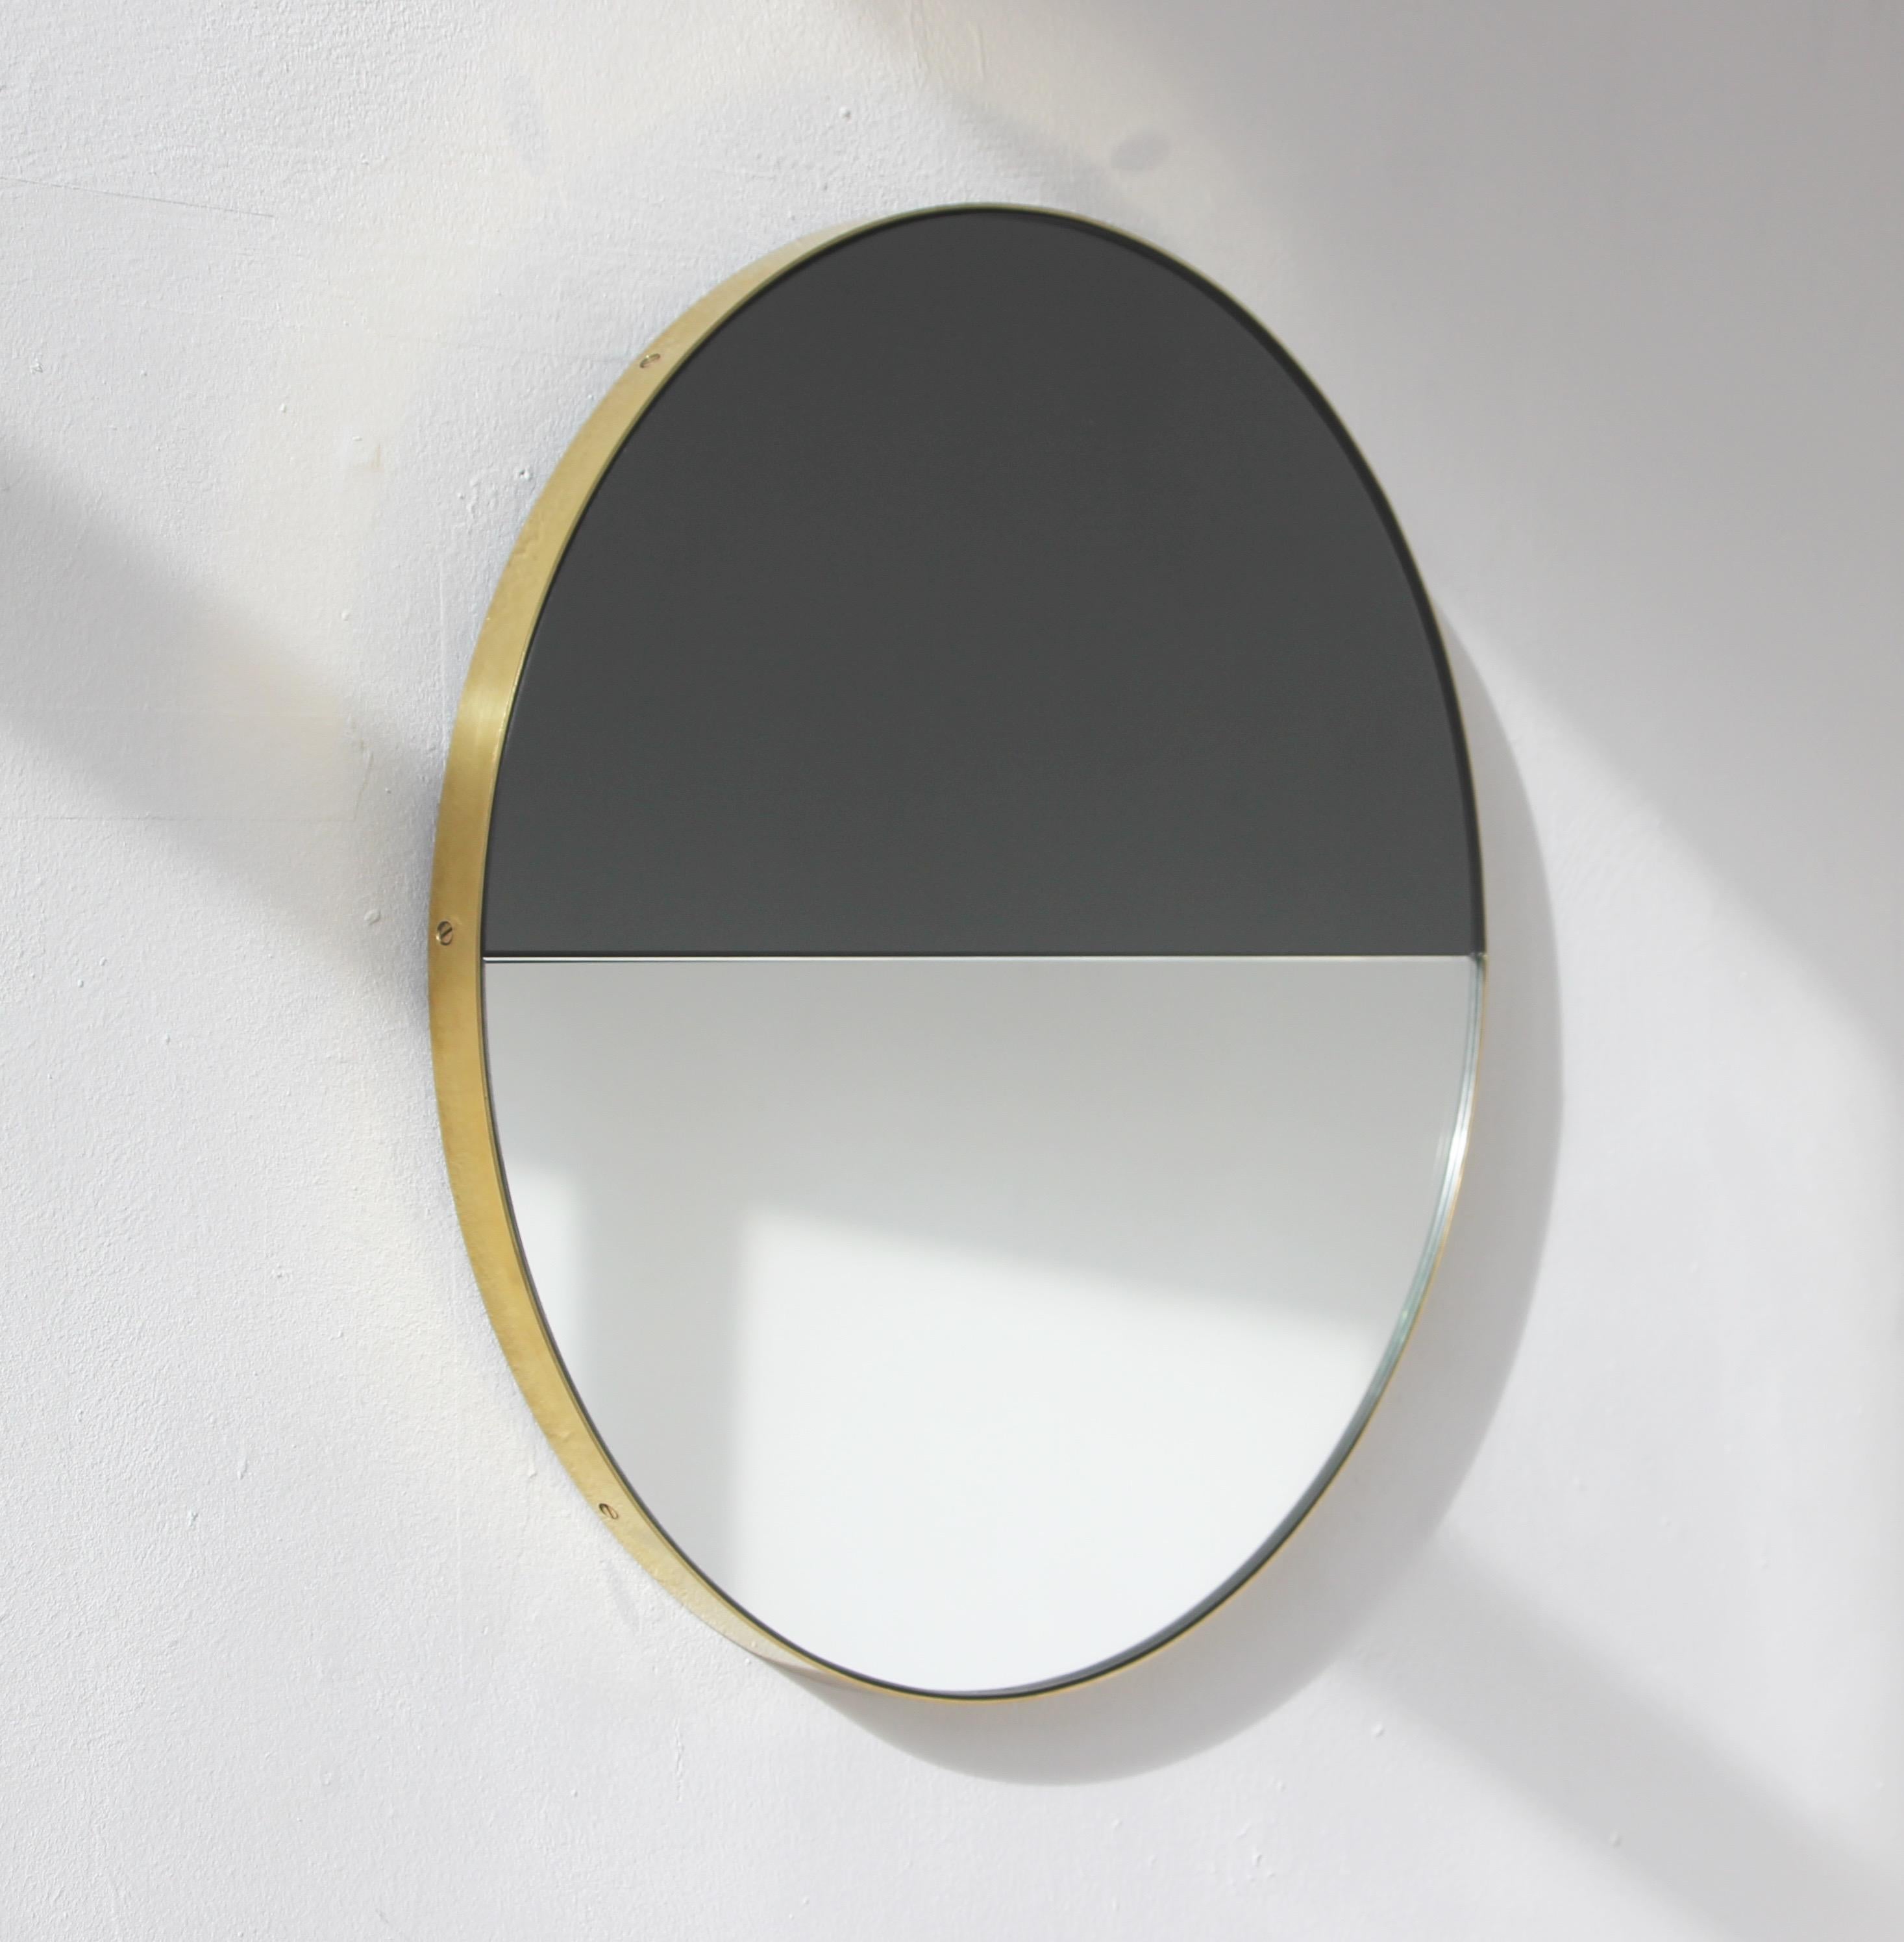 Contemporary mixed black and silver mirror tints Dualis Orbis with a brushed brass frame. Designed and handcrafted in London, UK.

Fitted with a specialist hanging system that allows the mirror to be hung in four different positions.

This mirror is